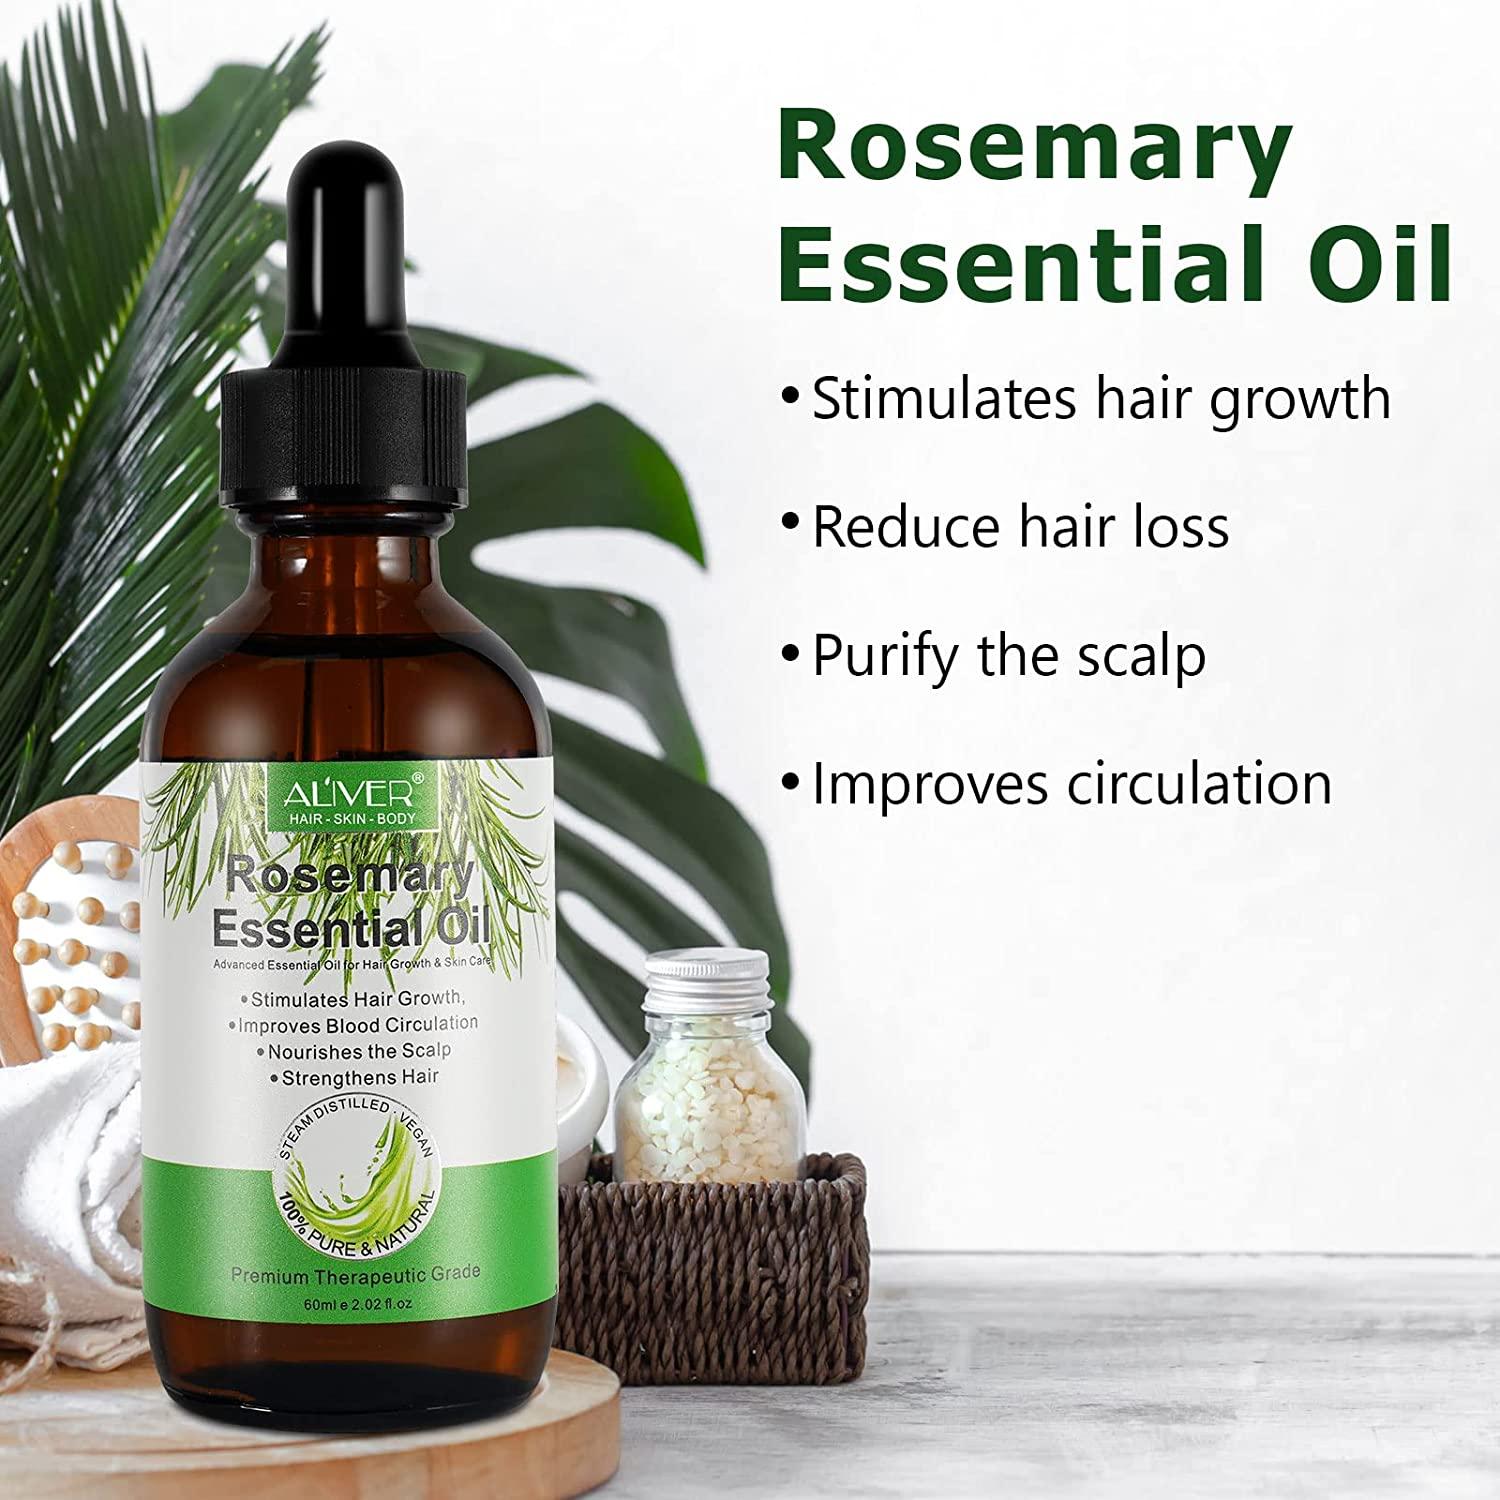 Rosemary Oil for Hair Growth & Skin Care, Rosemary Essential Oil,  Nourishment Scalp, Stimulates Hair Growth,Improves Blood Circulation,Rid of  Itchy & Dry Scalp, Hair Loss Treatment, Rosemary Hair Oil  Fl Oz (